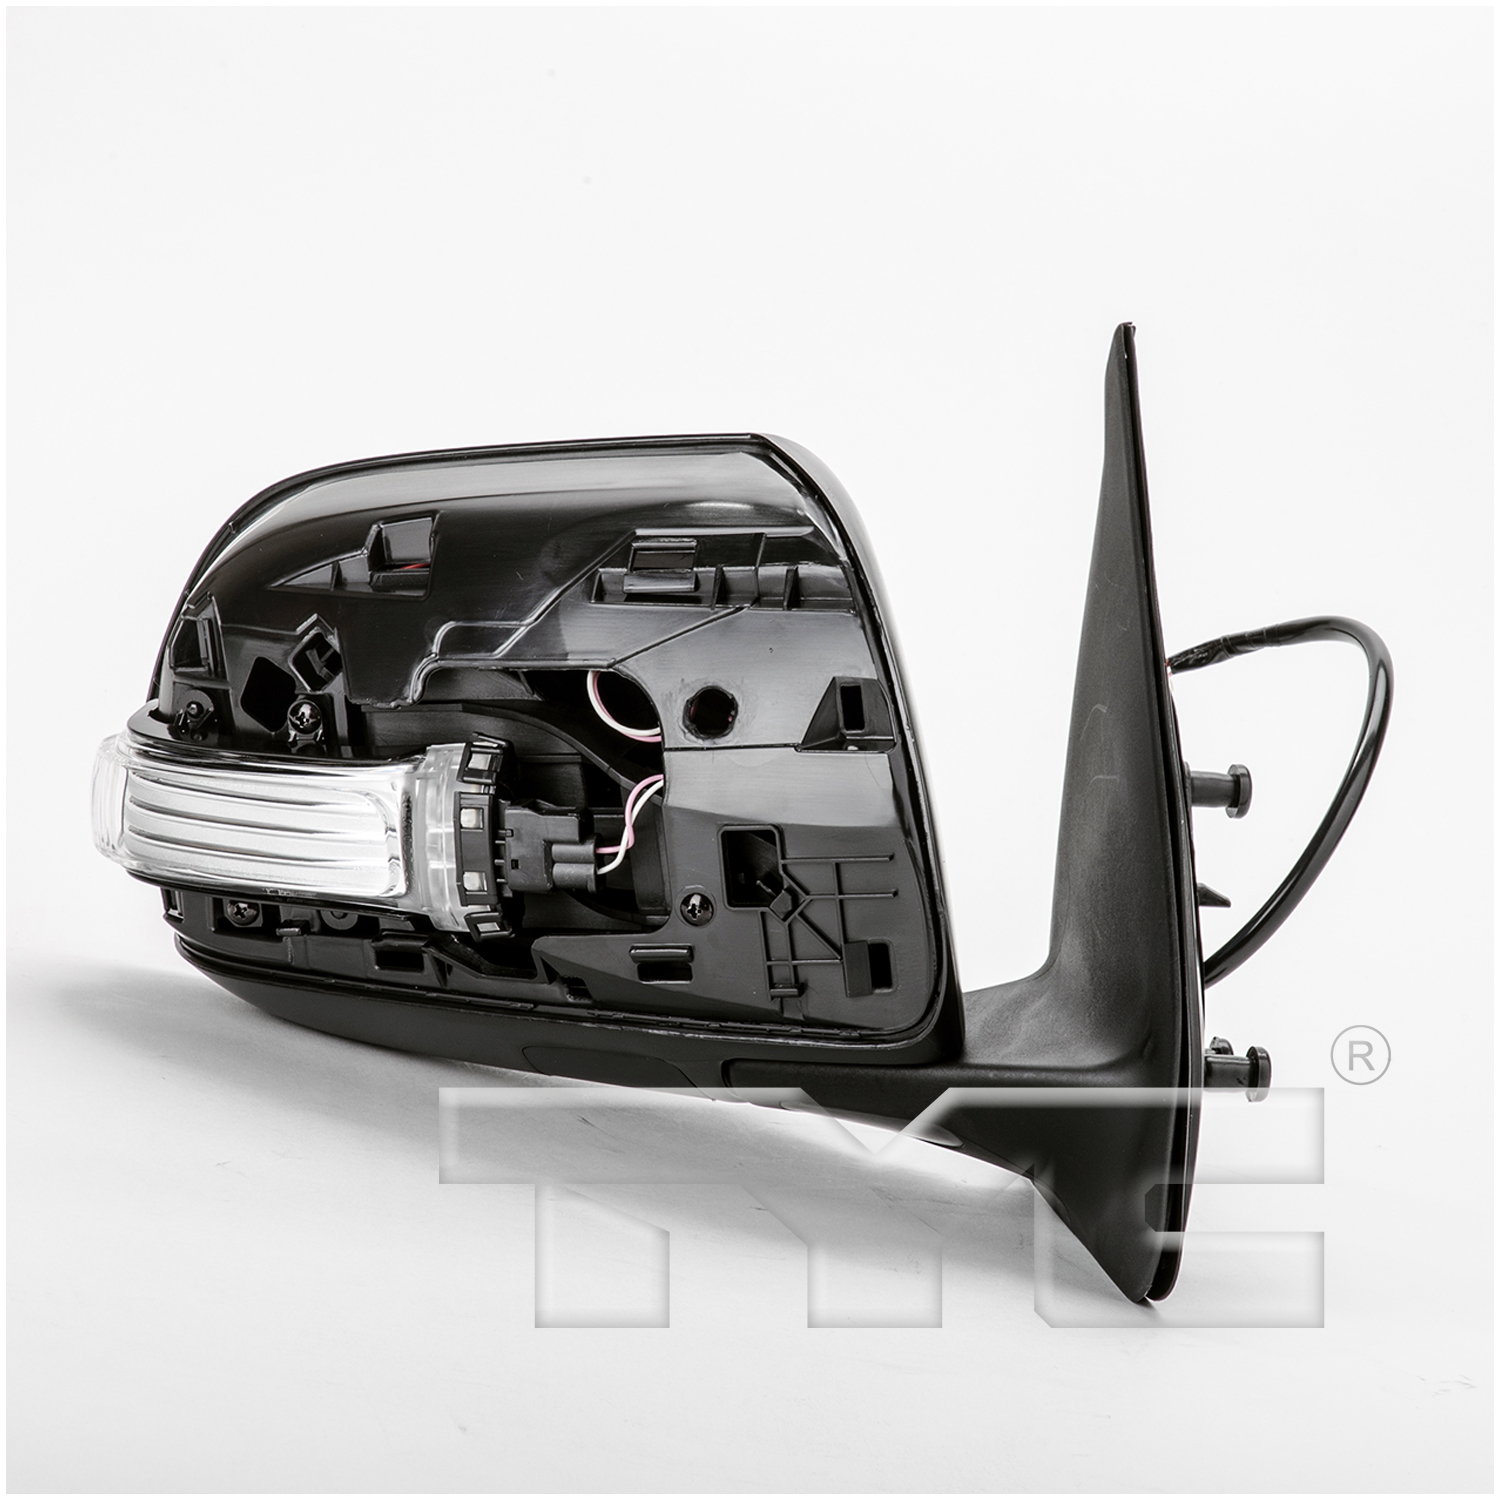 Aftermarket MIRRORS for TOYOTA - TACOMA, TACOMA,12-15,RT Mirror outside rear view